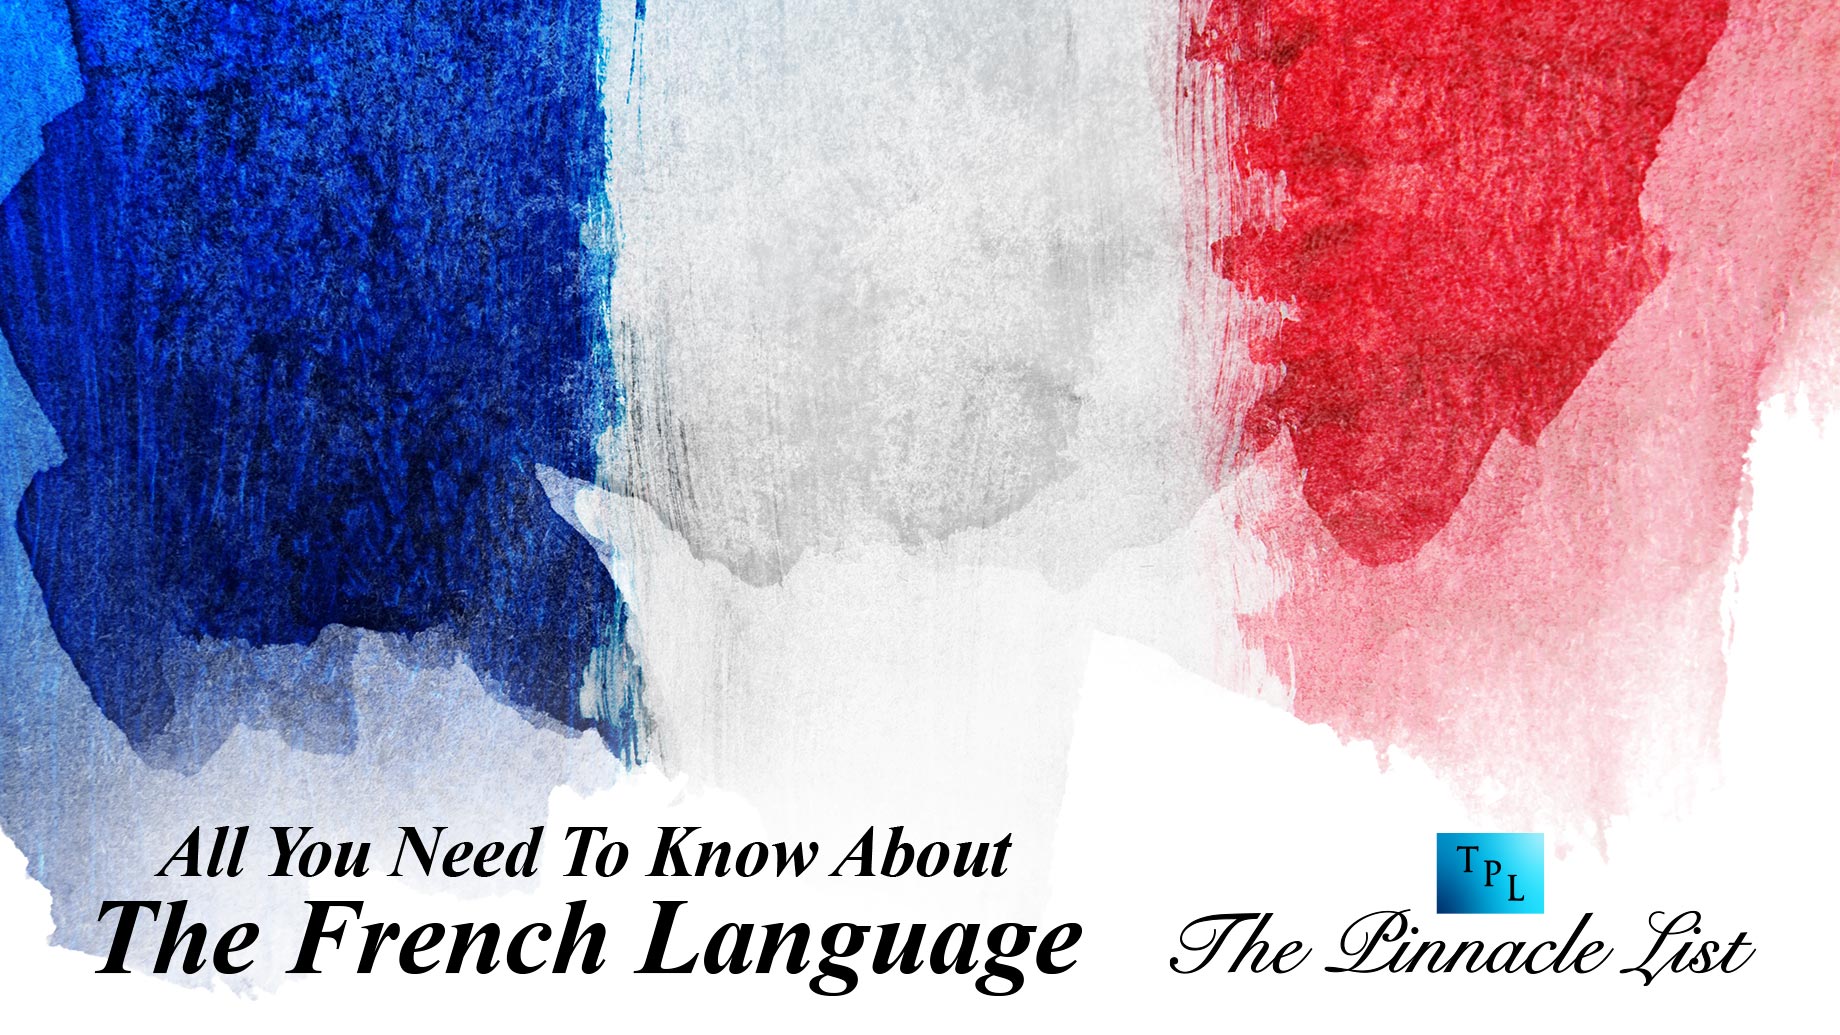 All You Need To Know About The French Language